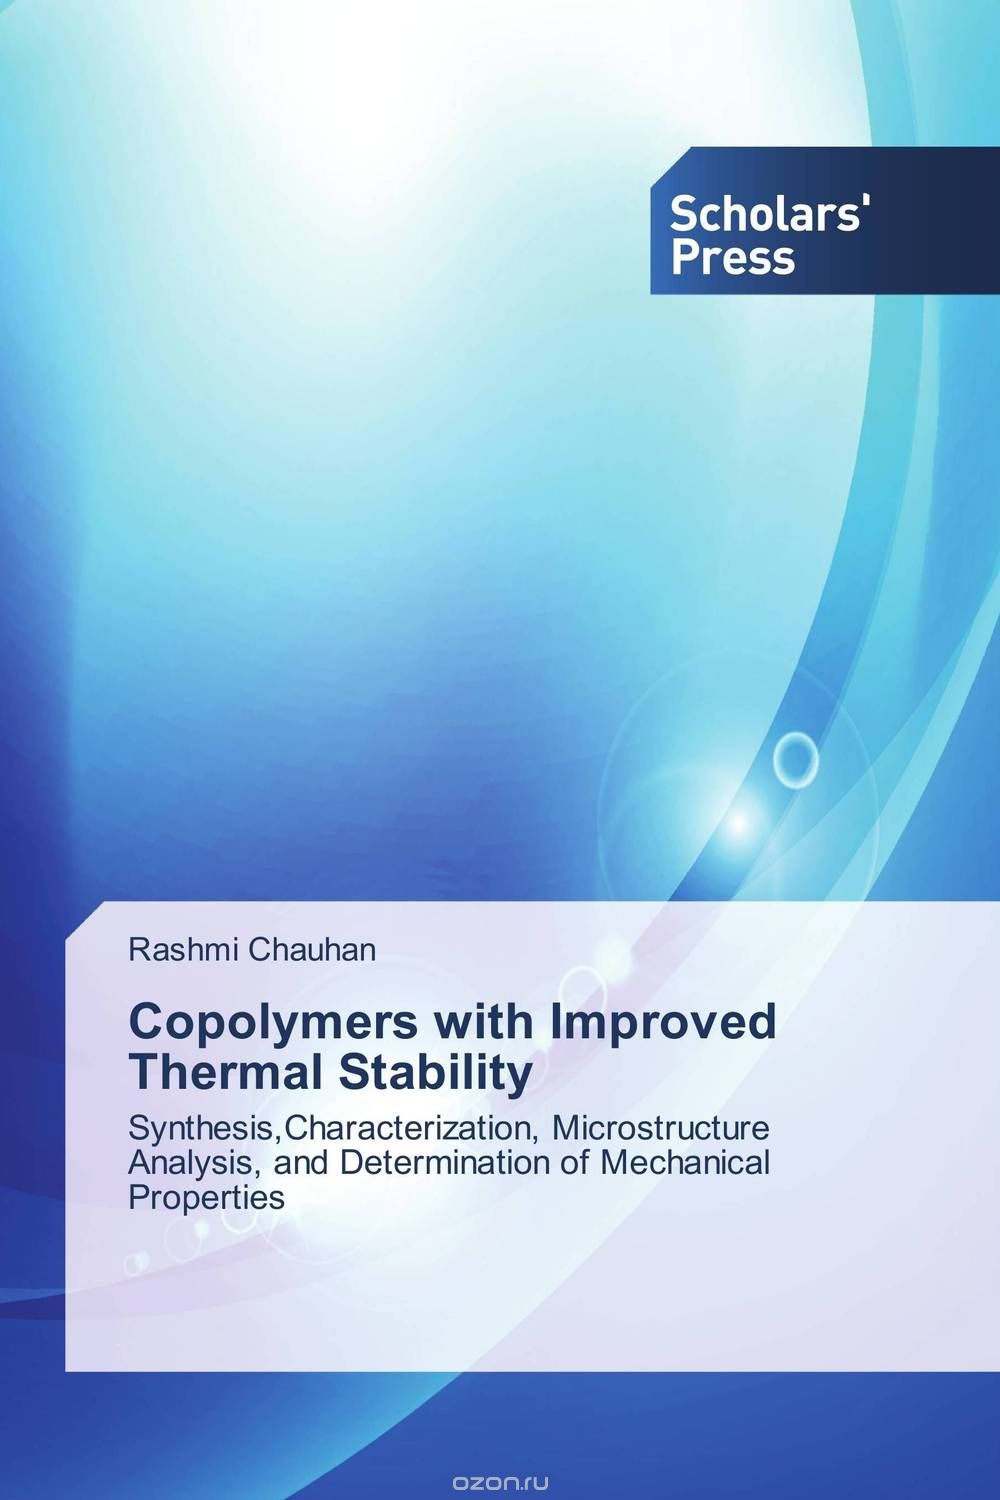 Скачать книгу "Copolymers with Improved Thermal Stability"